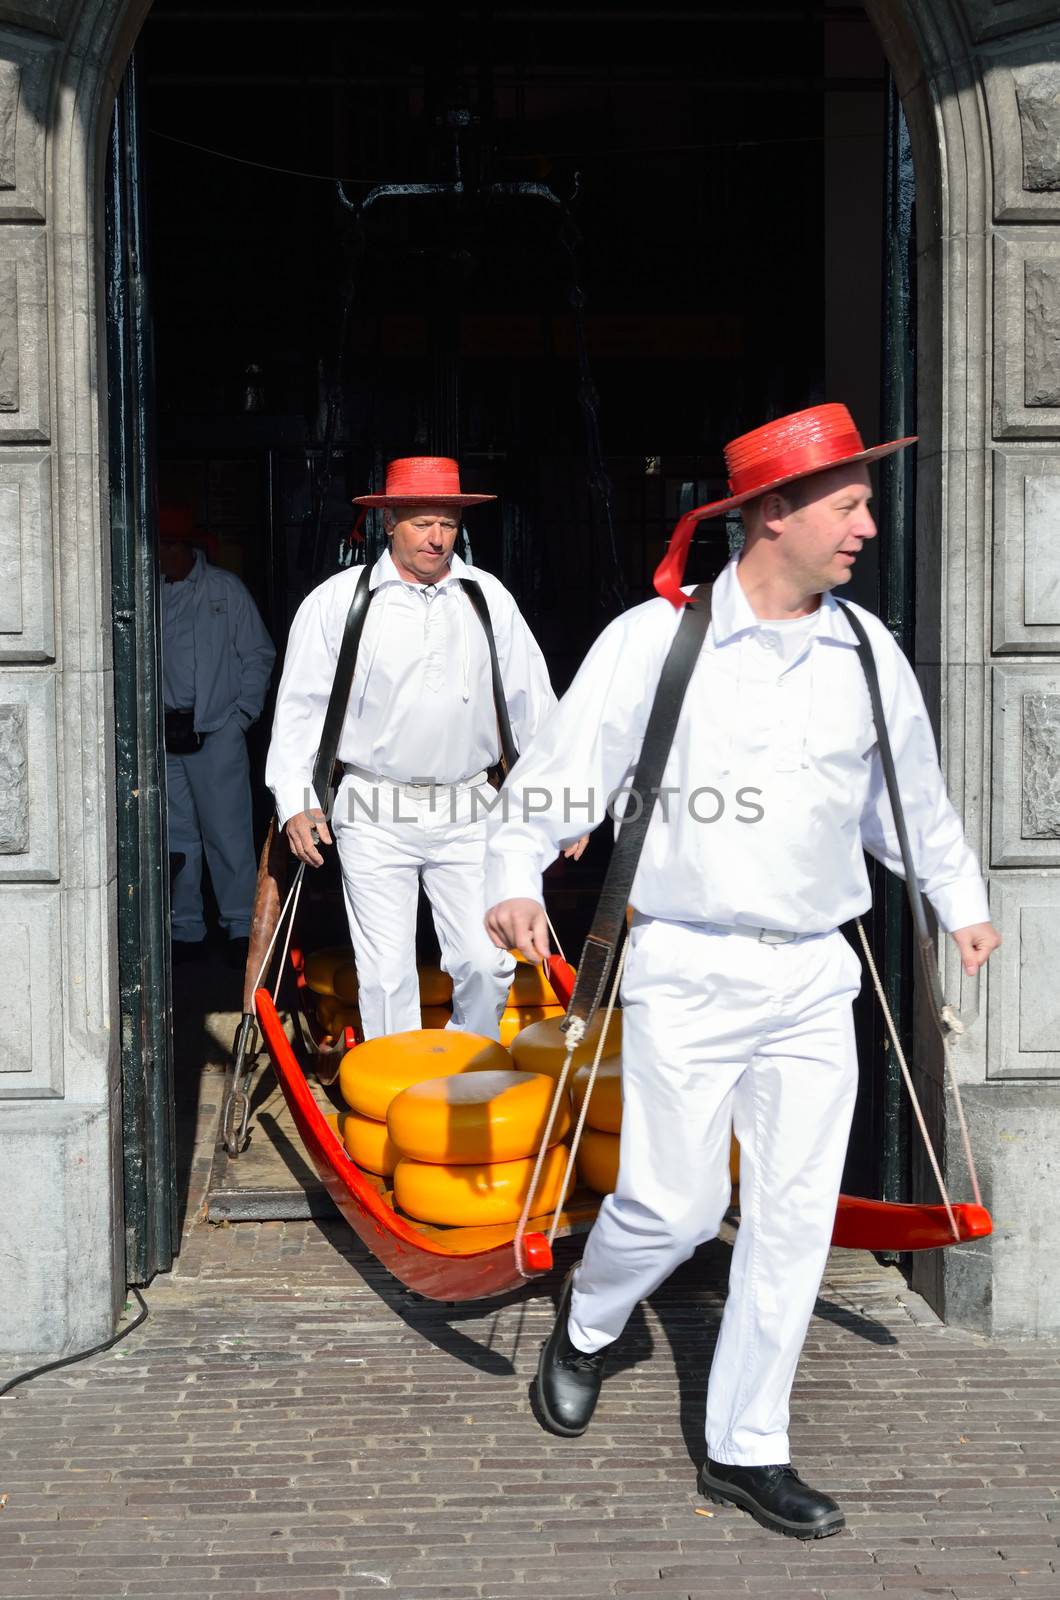 Alkmaar, the Netherlands – April 6, 2012: Two men carrying cheese on the famous cheese market in Alkmaar in the Netherlands.